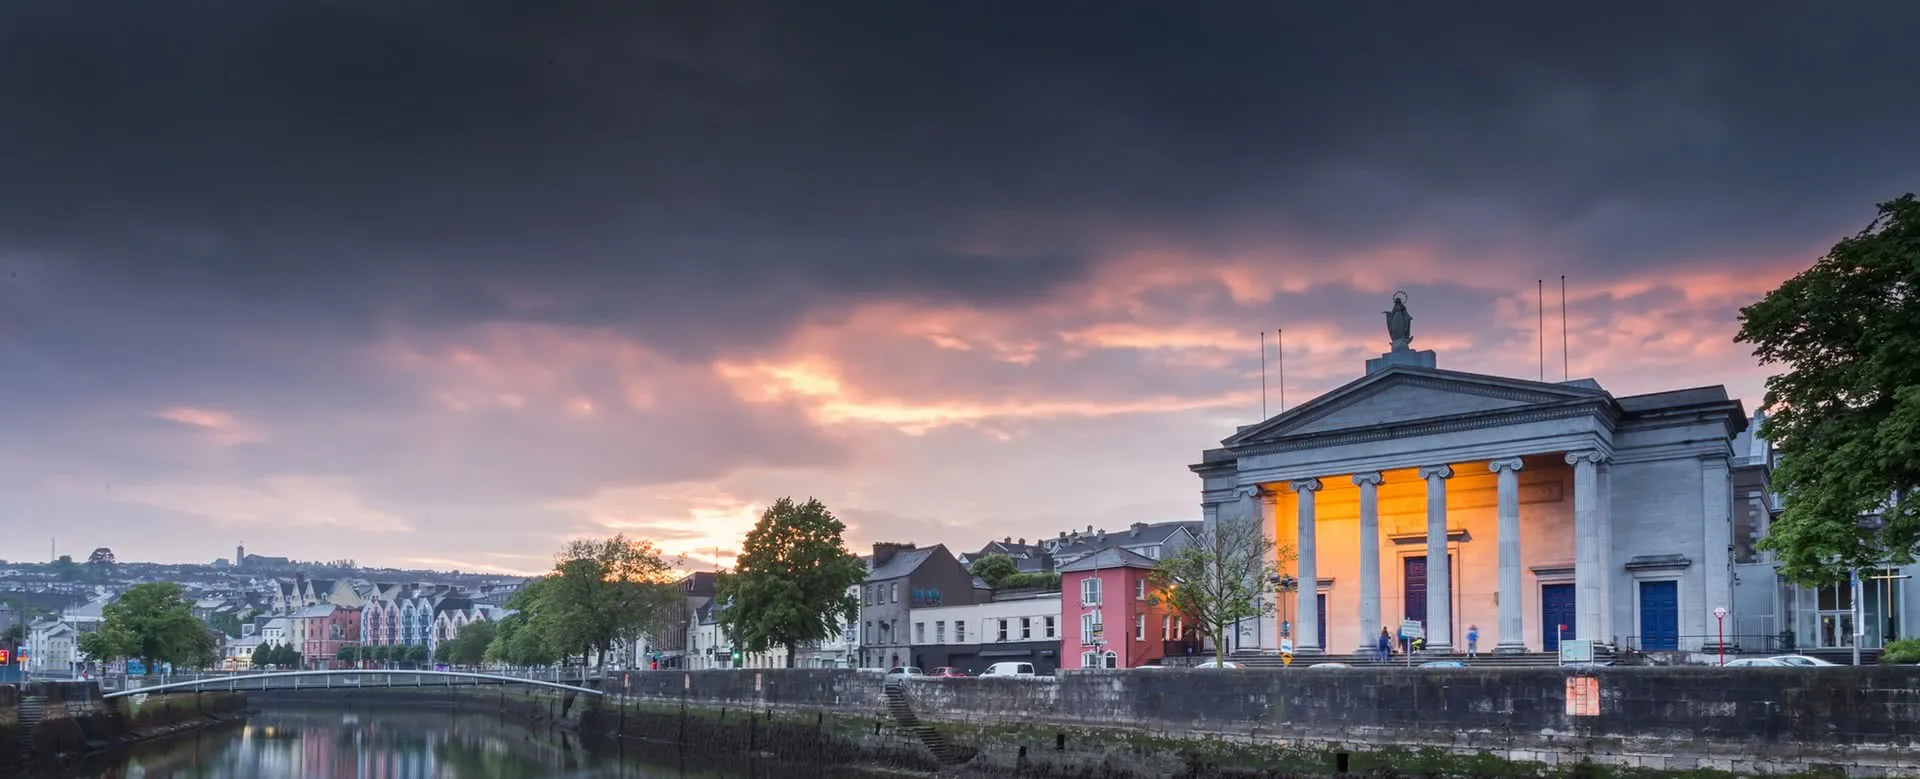 Meeting and conference location Cork